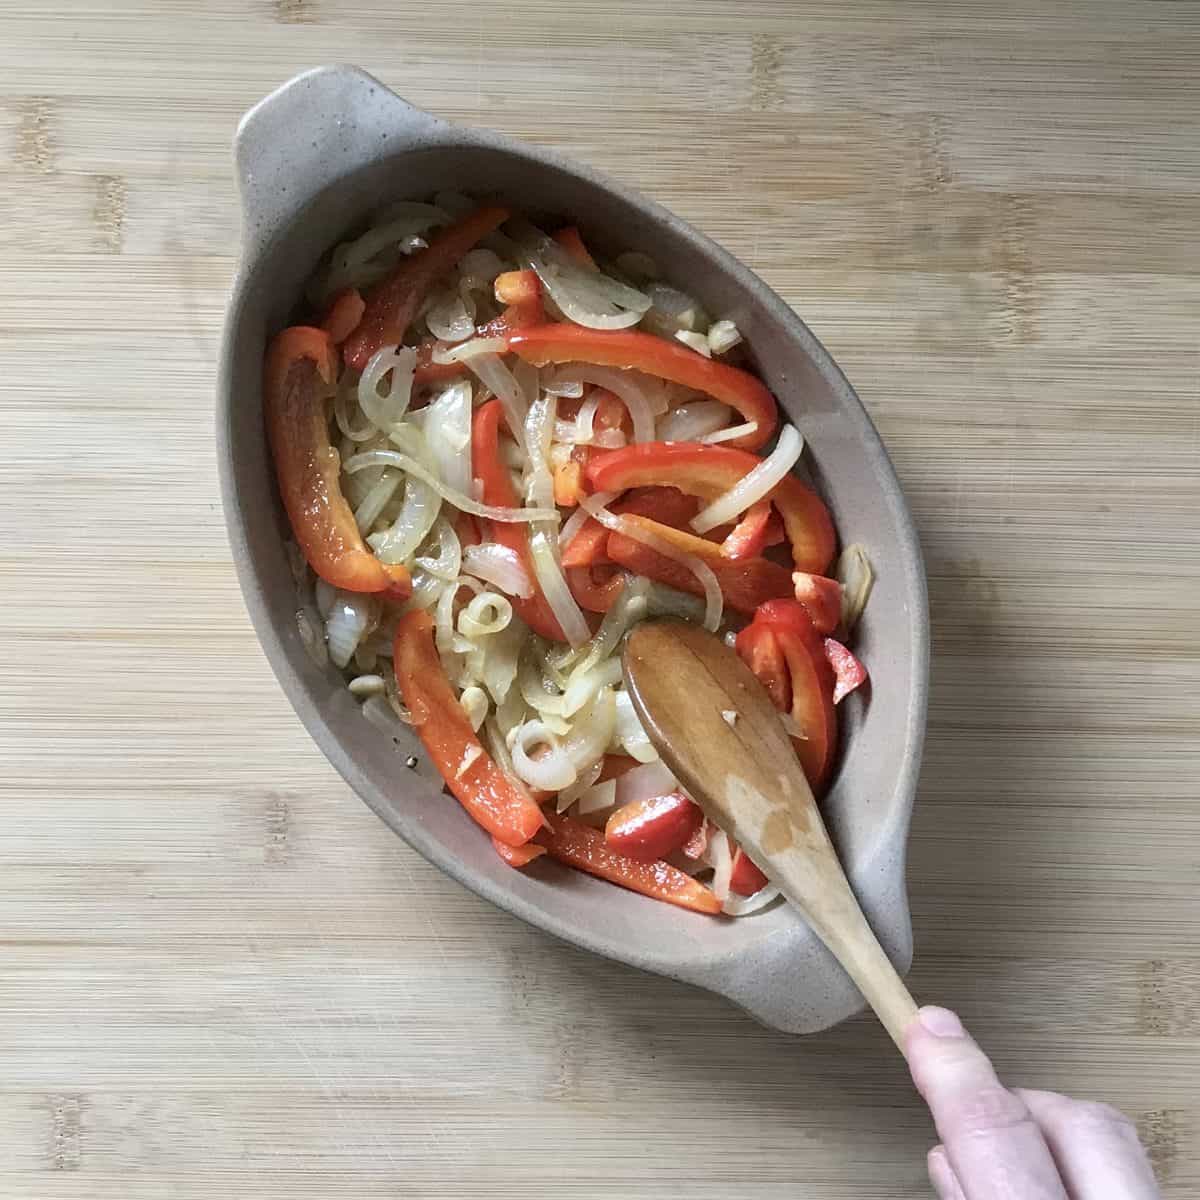 Sauteed vegetables in a casserole dish. 